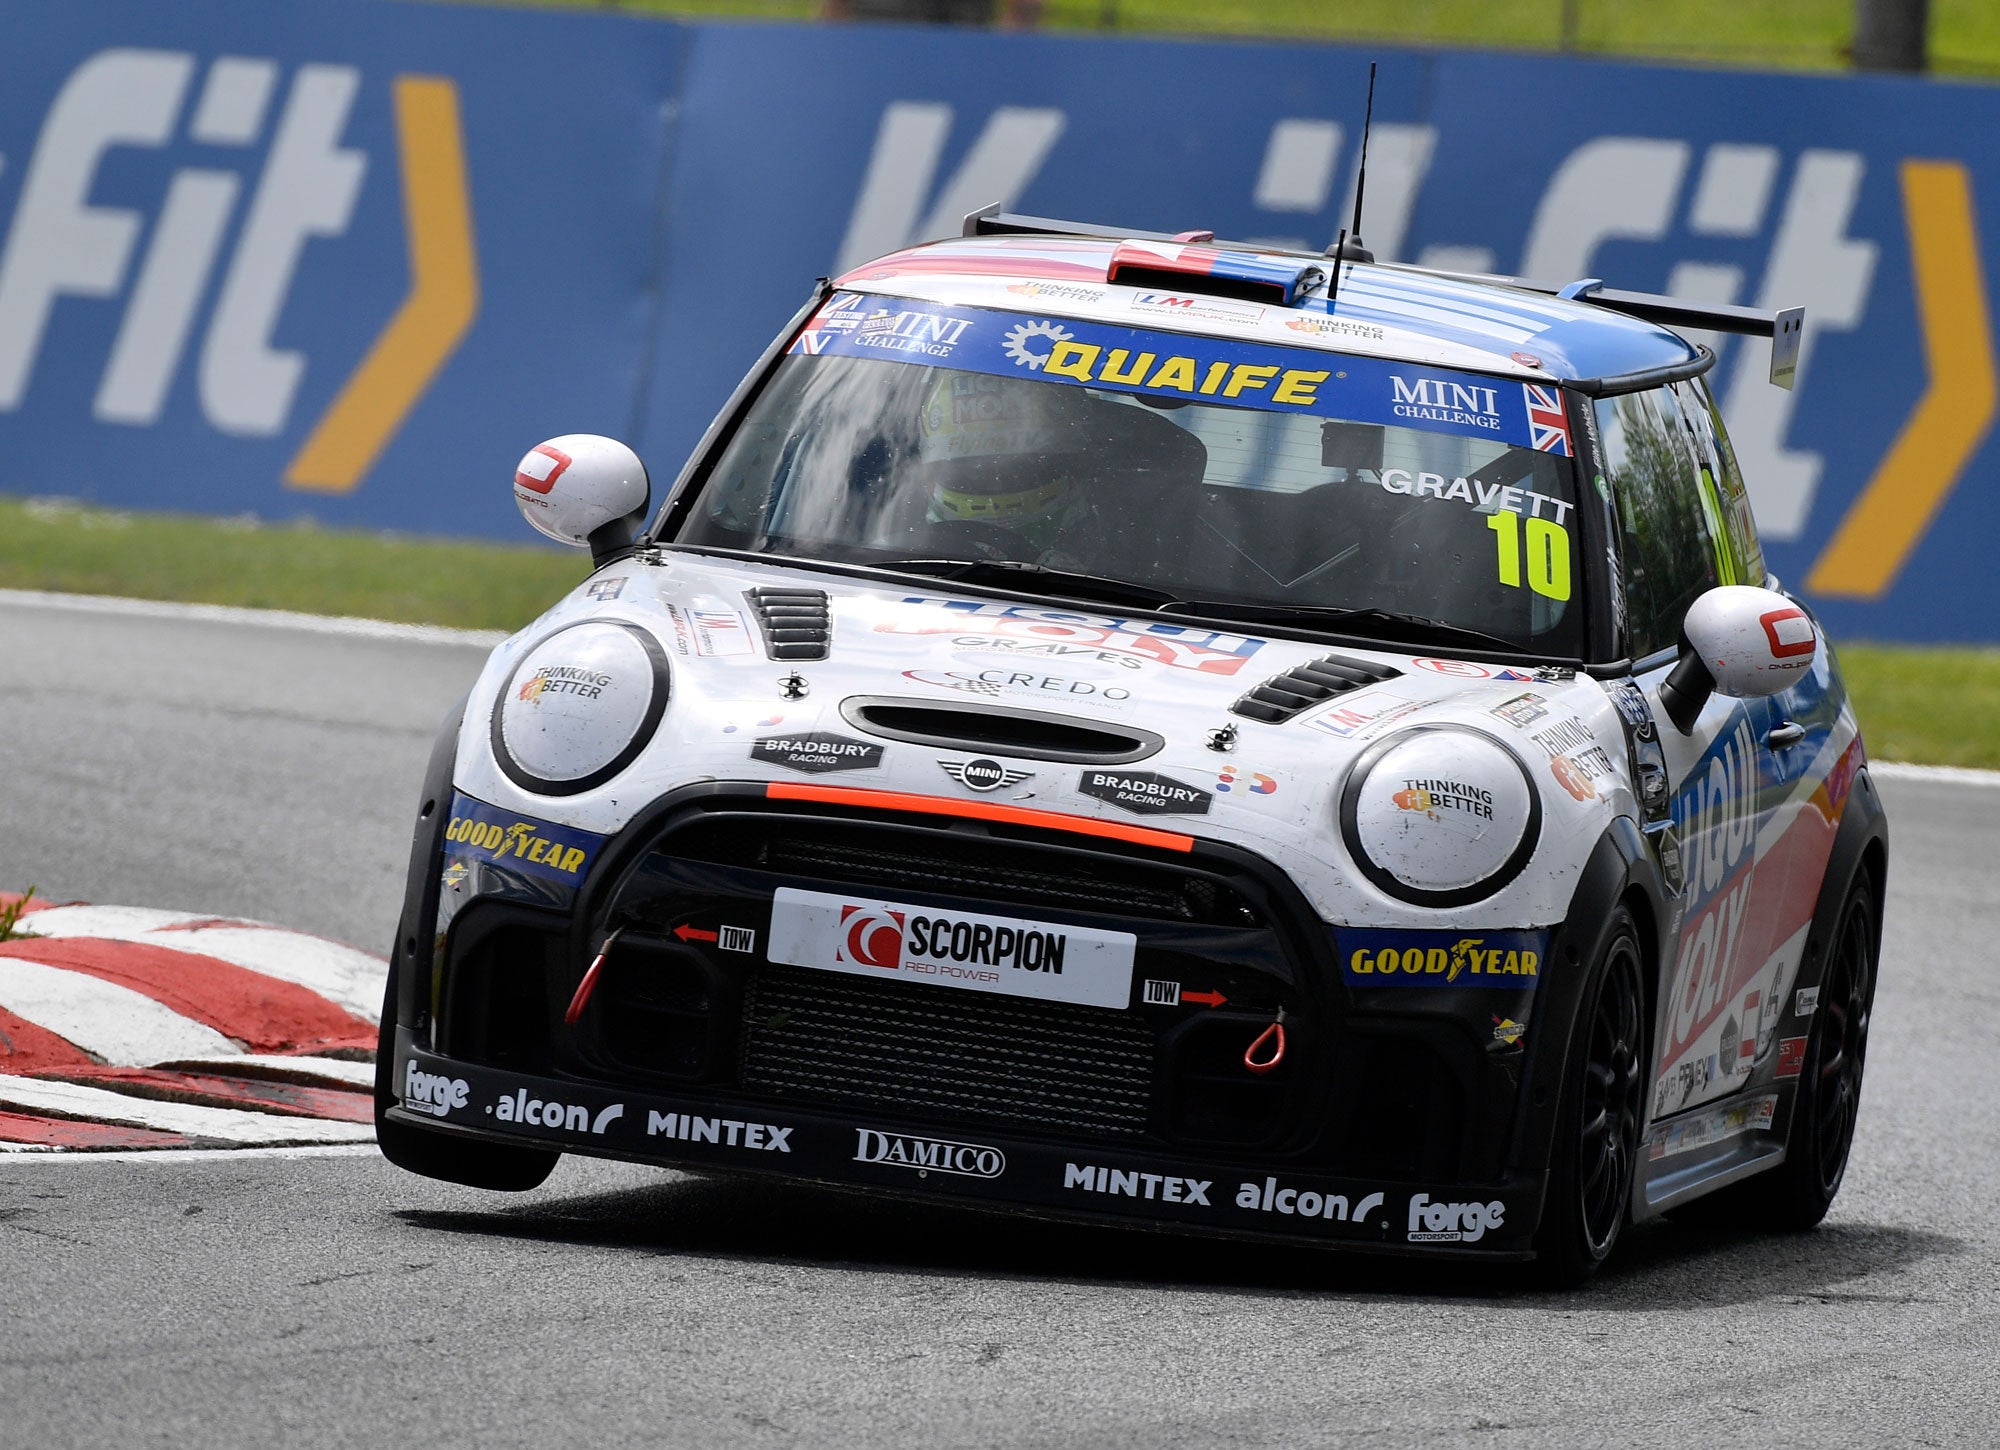 Bradley Gravett son of BTCC British Touring Car Champion Robb Gravett in the MINI Challenge JCW Series at Oulton Park in 2022 Entry to Hislops Chicane Graves Motorsport Cooper Racing Driver LIQUI MOLY LM Performance Thinking it Better